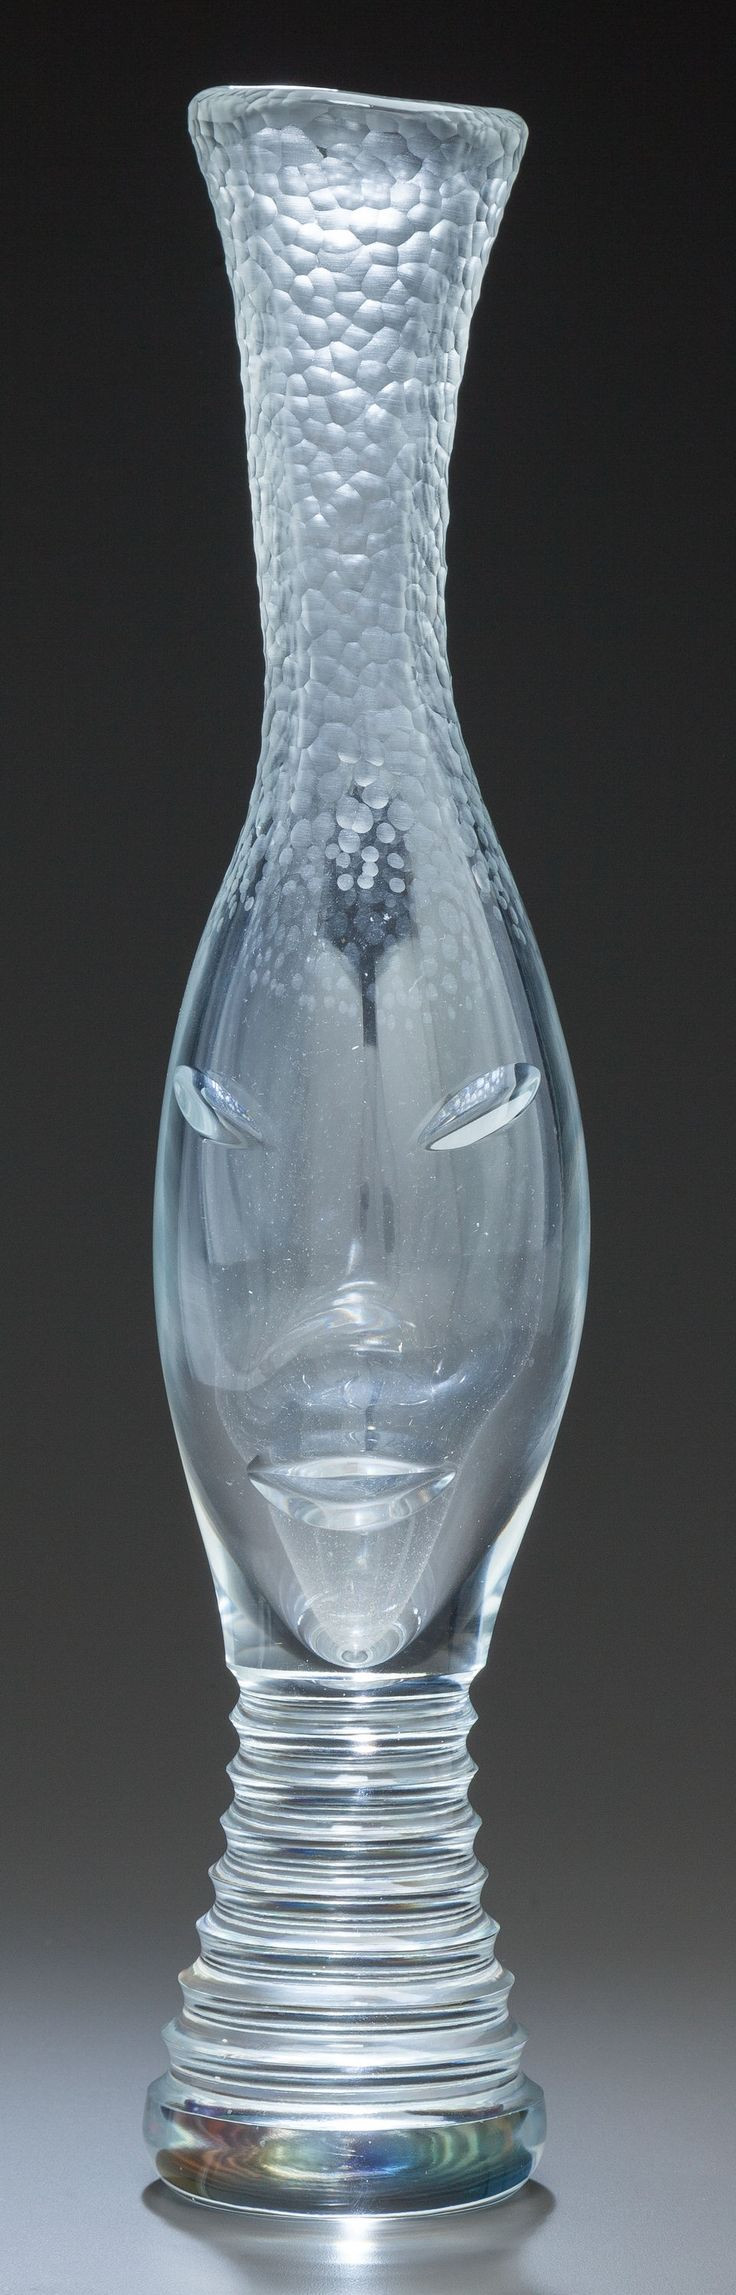 12 Nice orrefors Crystal Bud Vase 2024 free download orrefors crystal bud vase of 120 best glass images on pinterest glass art stained glass and intended for vicke lindstrand swedish 1904 1983 orrefors engraved glass